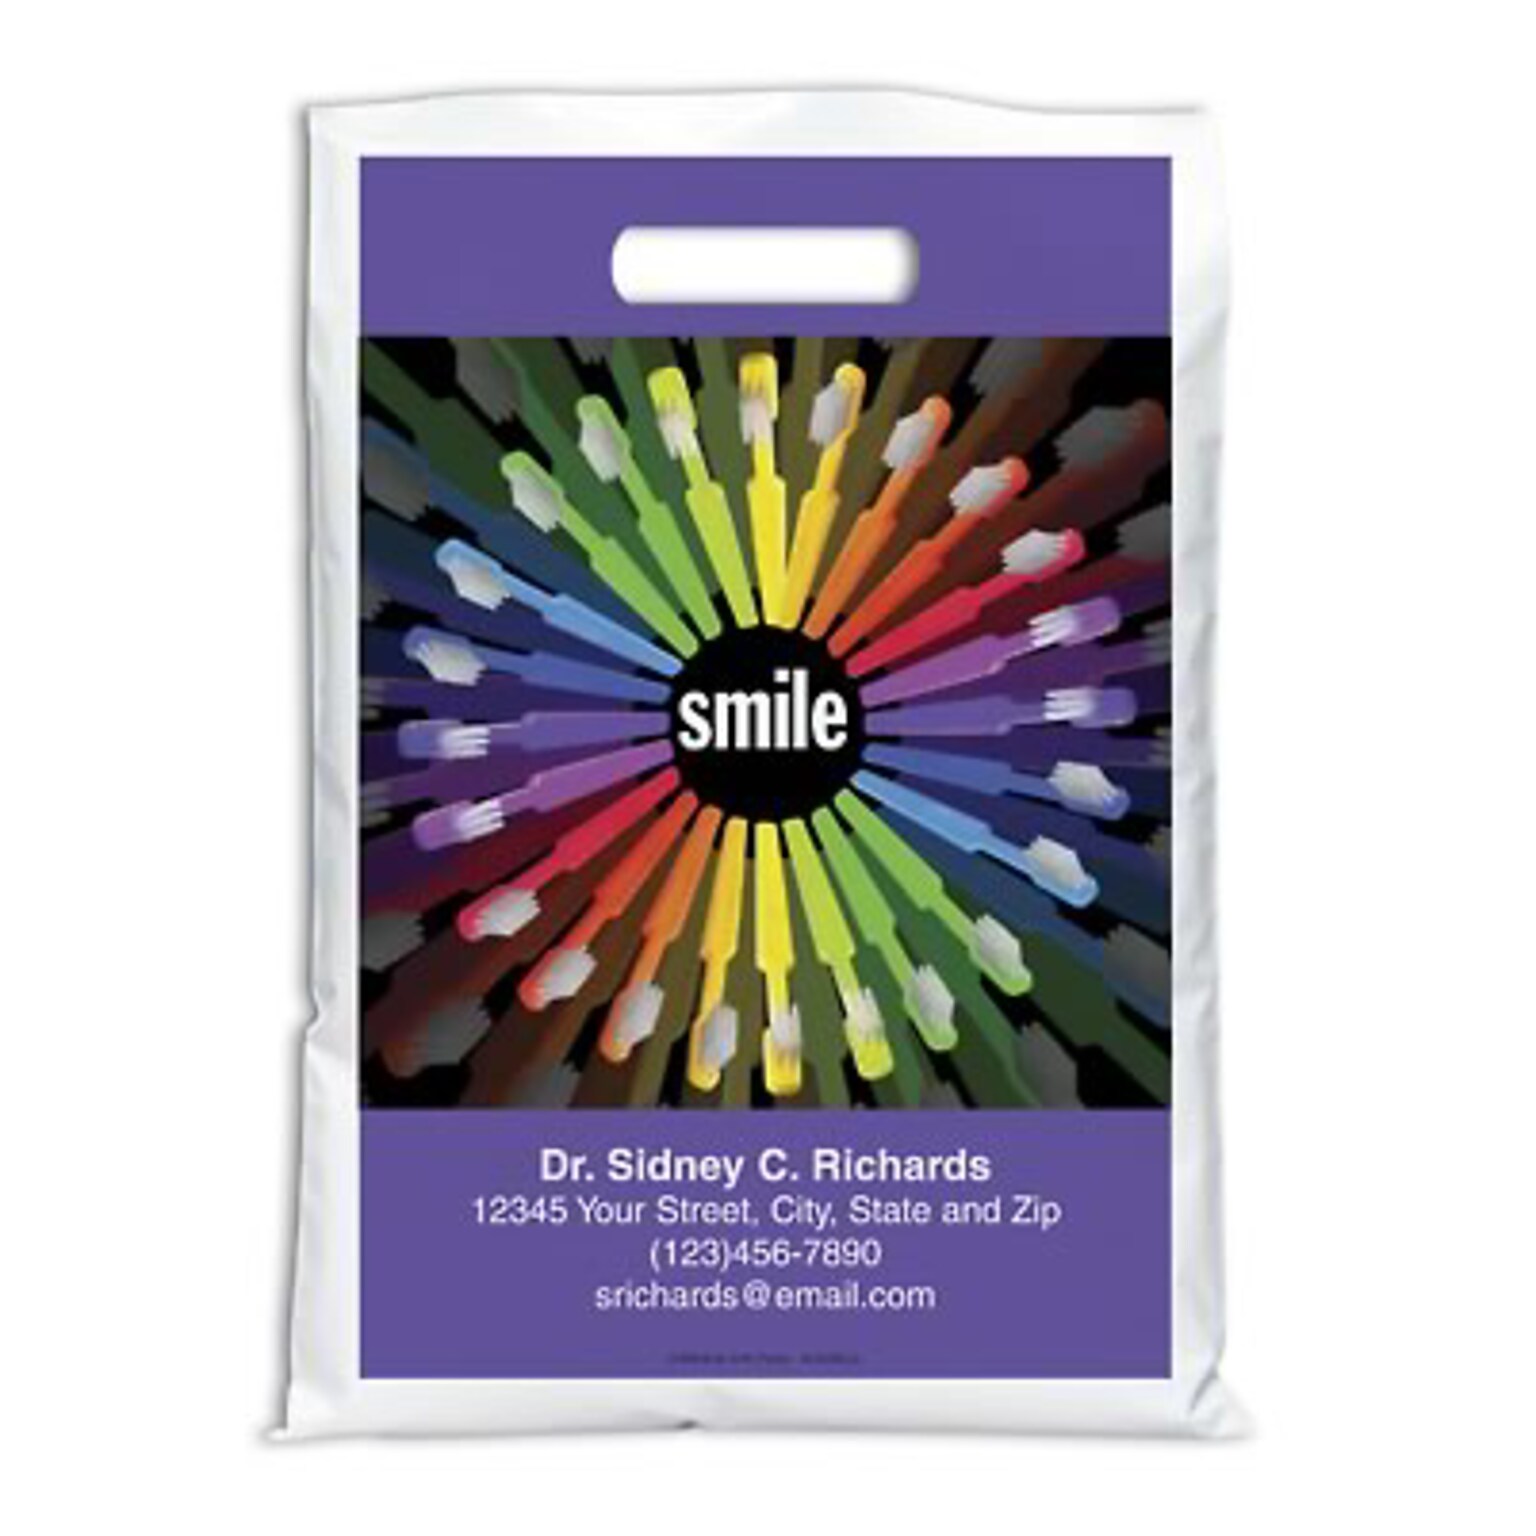 Medical Arts Press® Dental Personalized Full Color Bags; 9x13, 4-Colored Toothbrushes, 100 Bags, (56636)